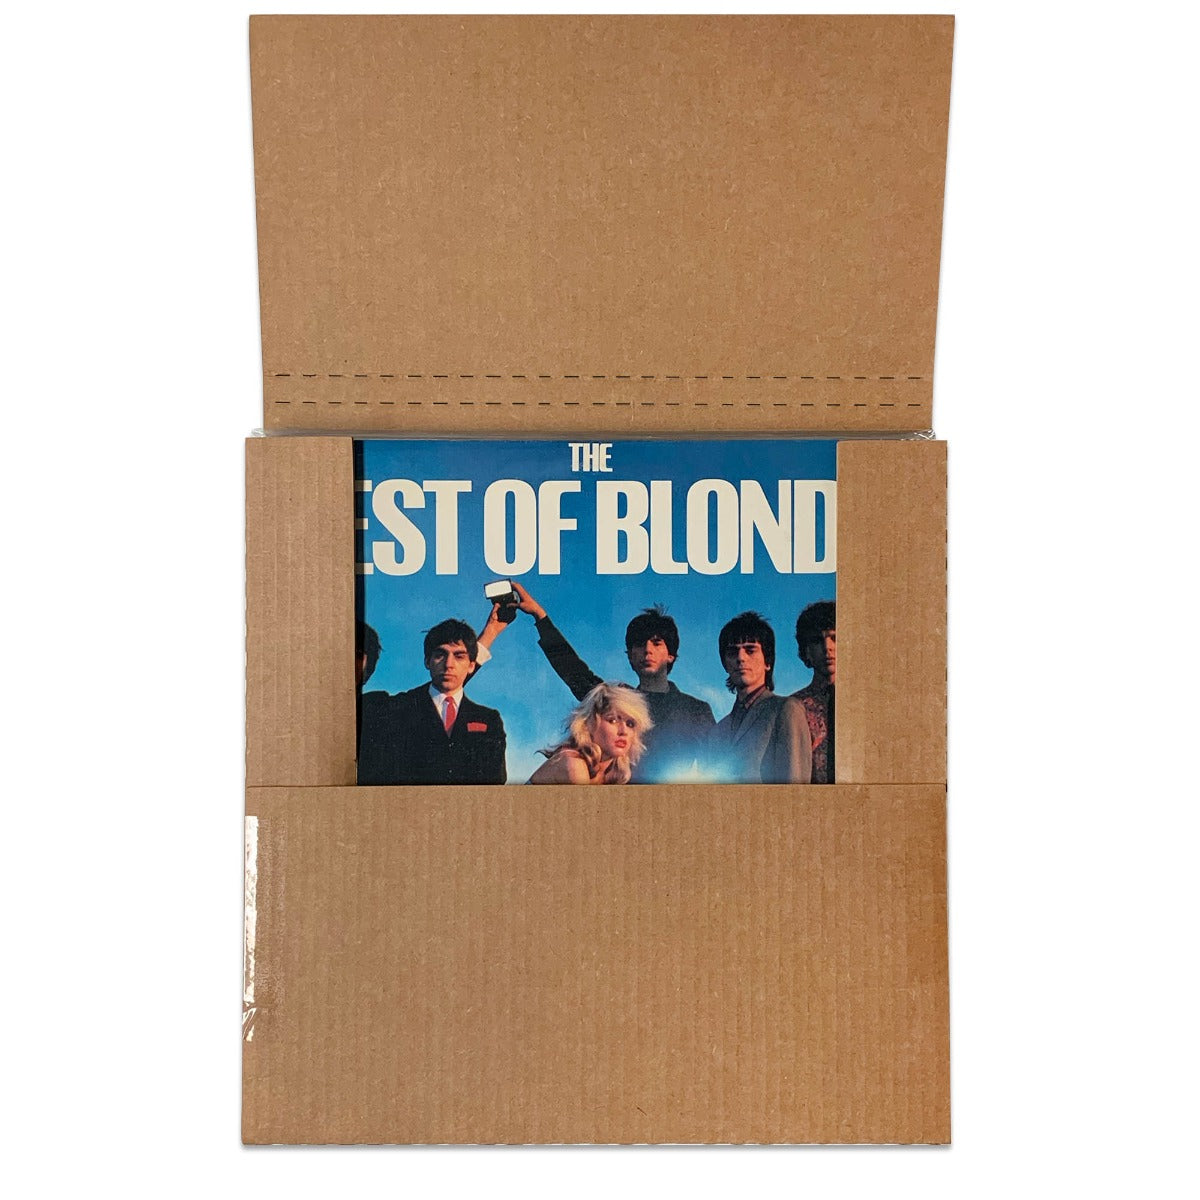 BCW Wrap Mailer for 33 RPM Records EACH